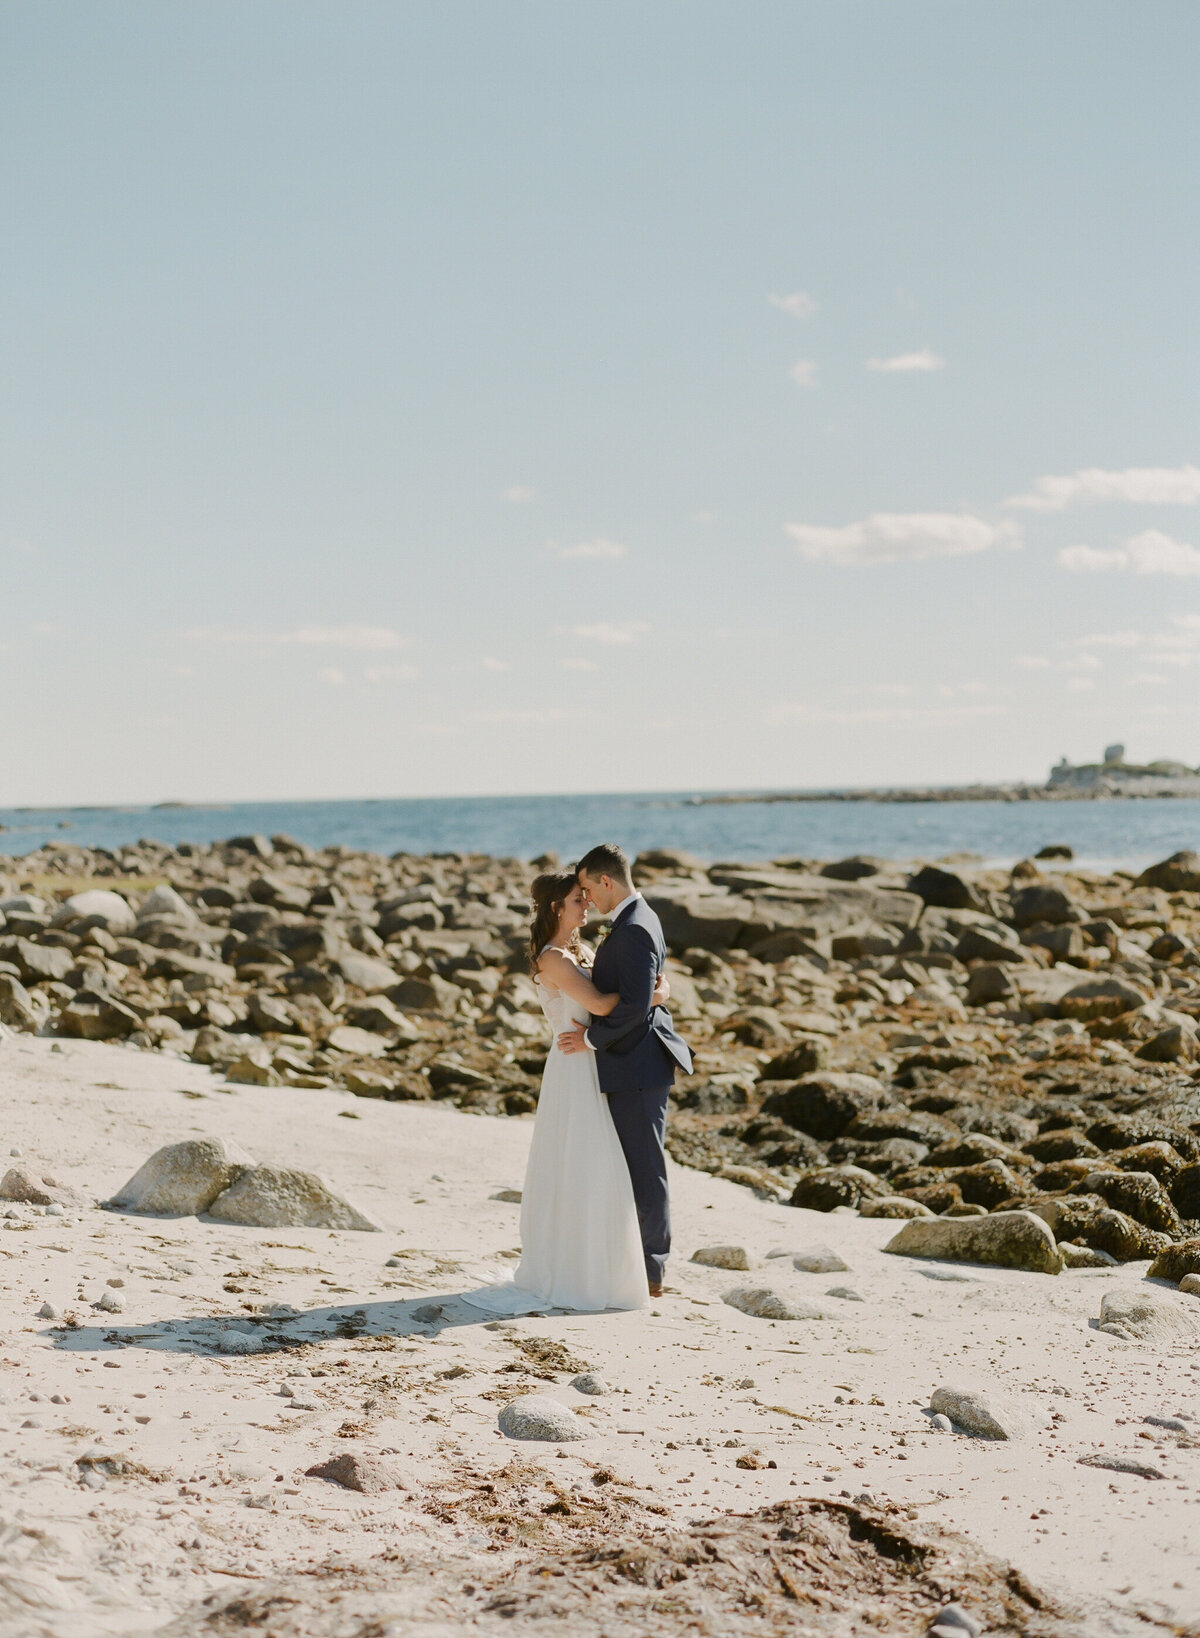 Jacqueline Anne Photography - Halifax Wedding Photographer - Jaclyn and Morgan-25